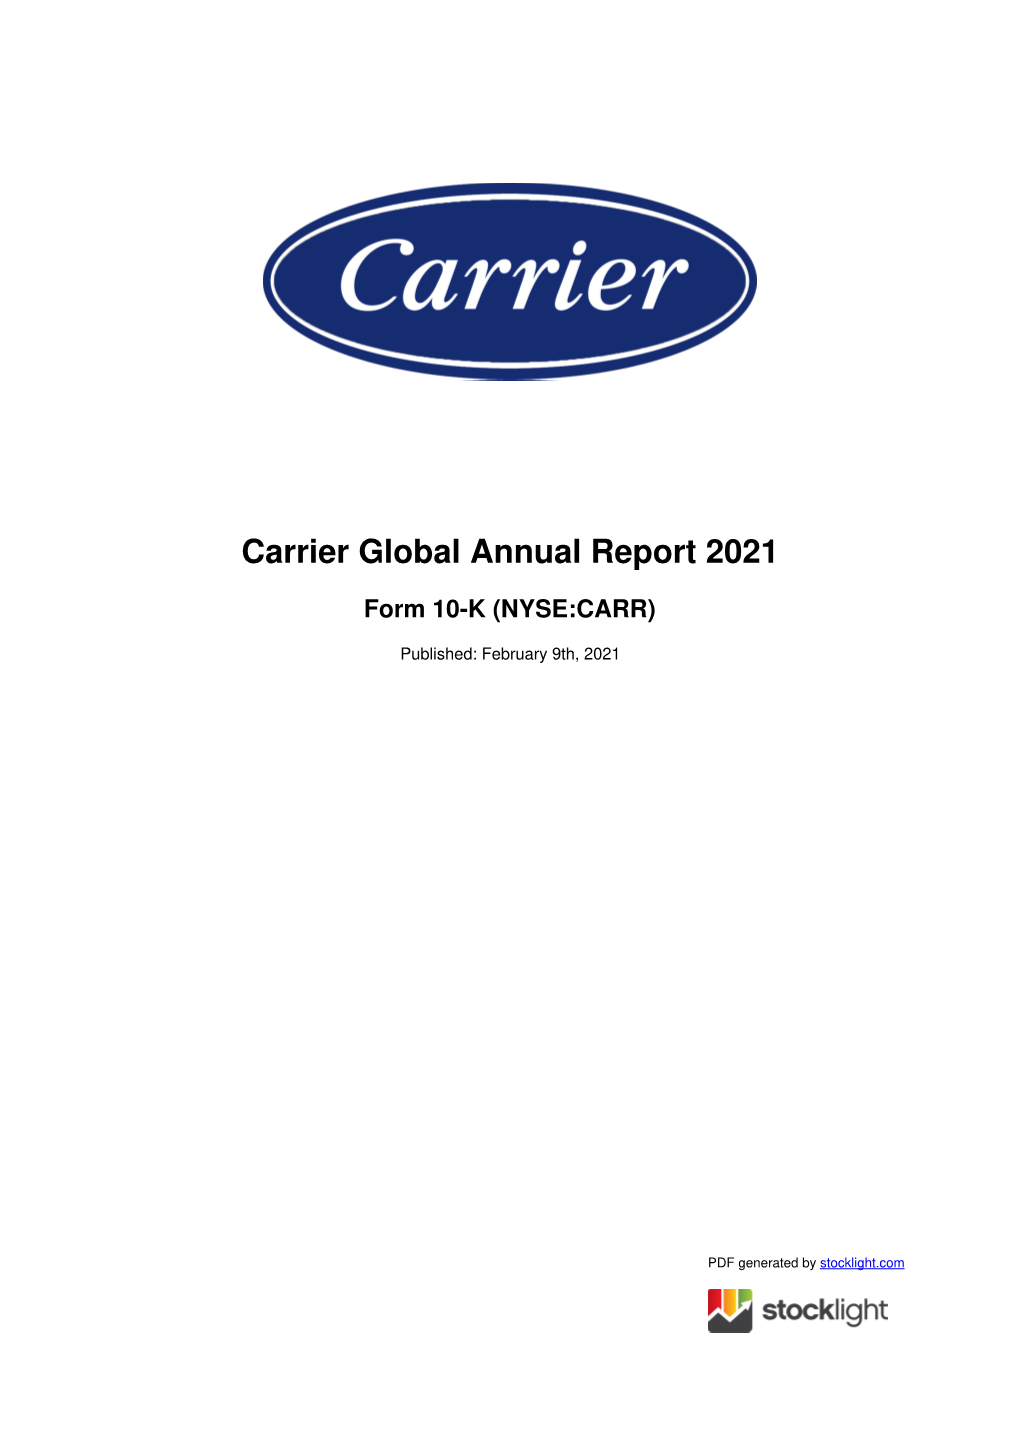 Carrier Global Annual Report 2021